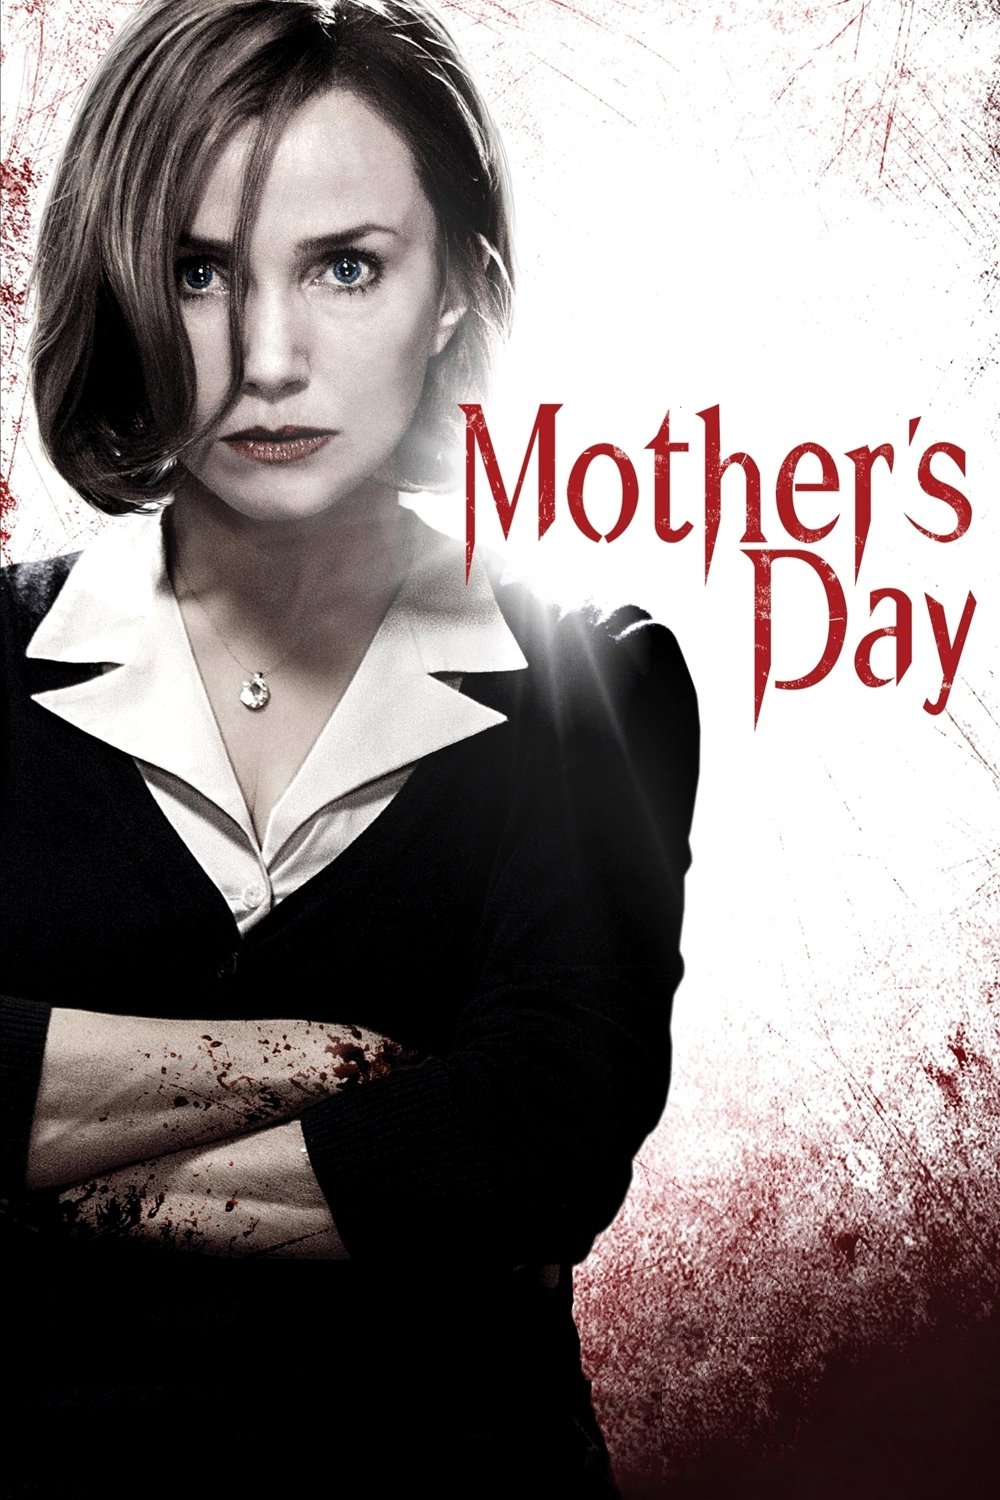 Poster for the movie "Mother's Day"